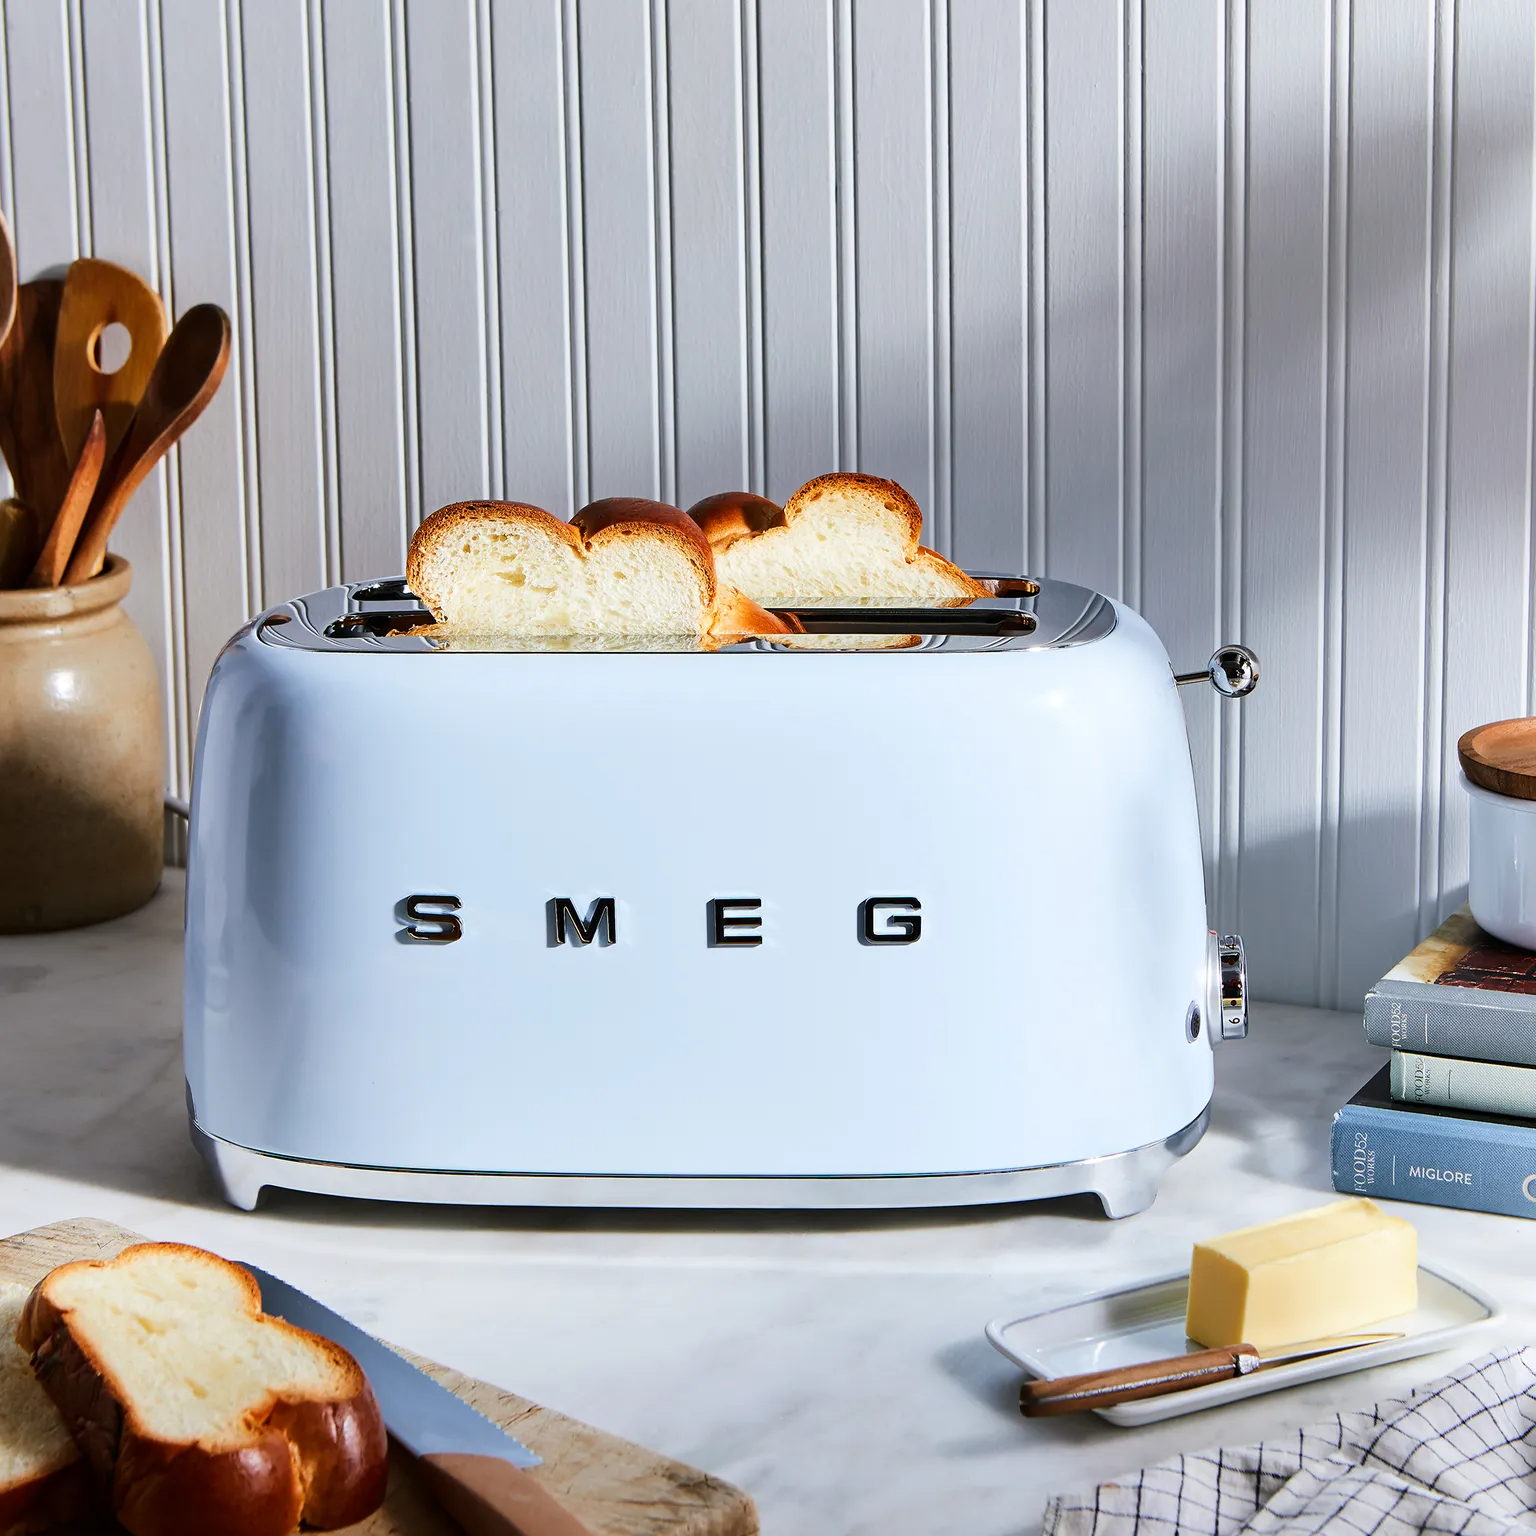 What Is A Smeg Toaster